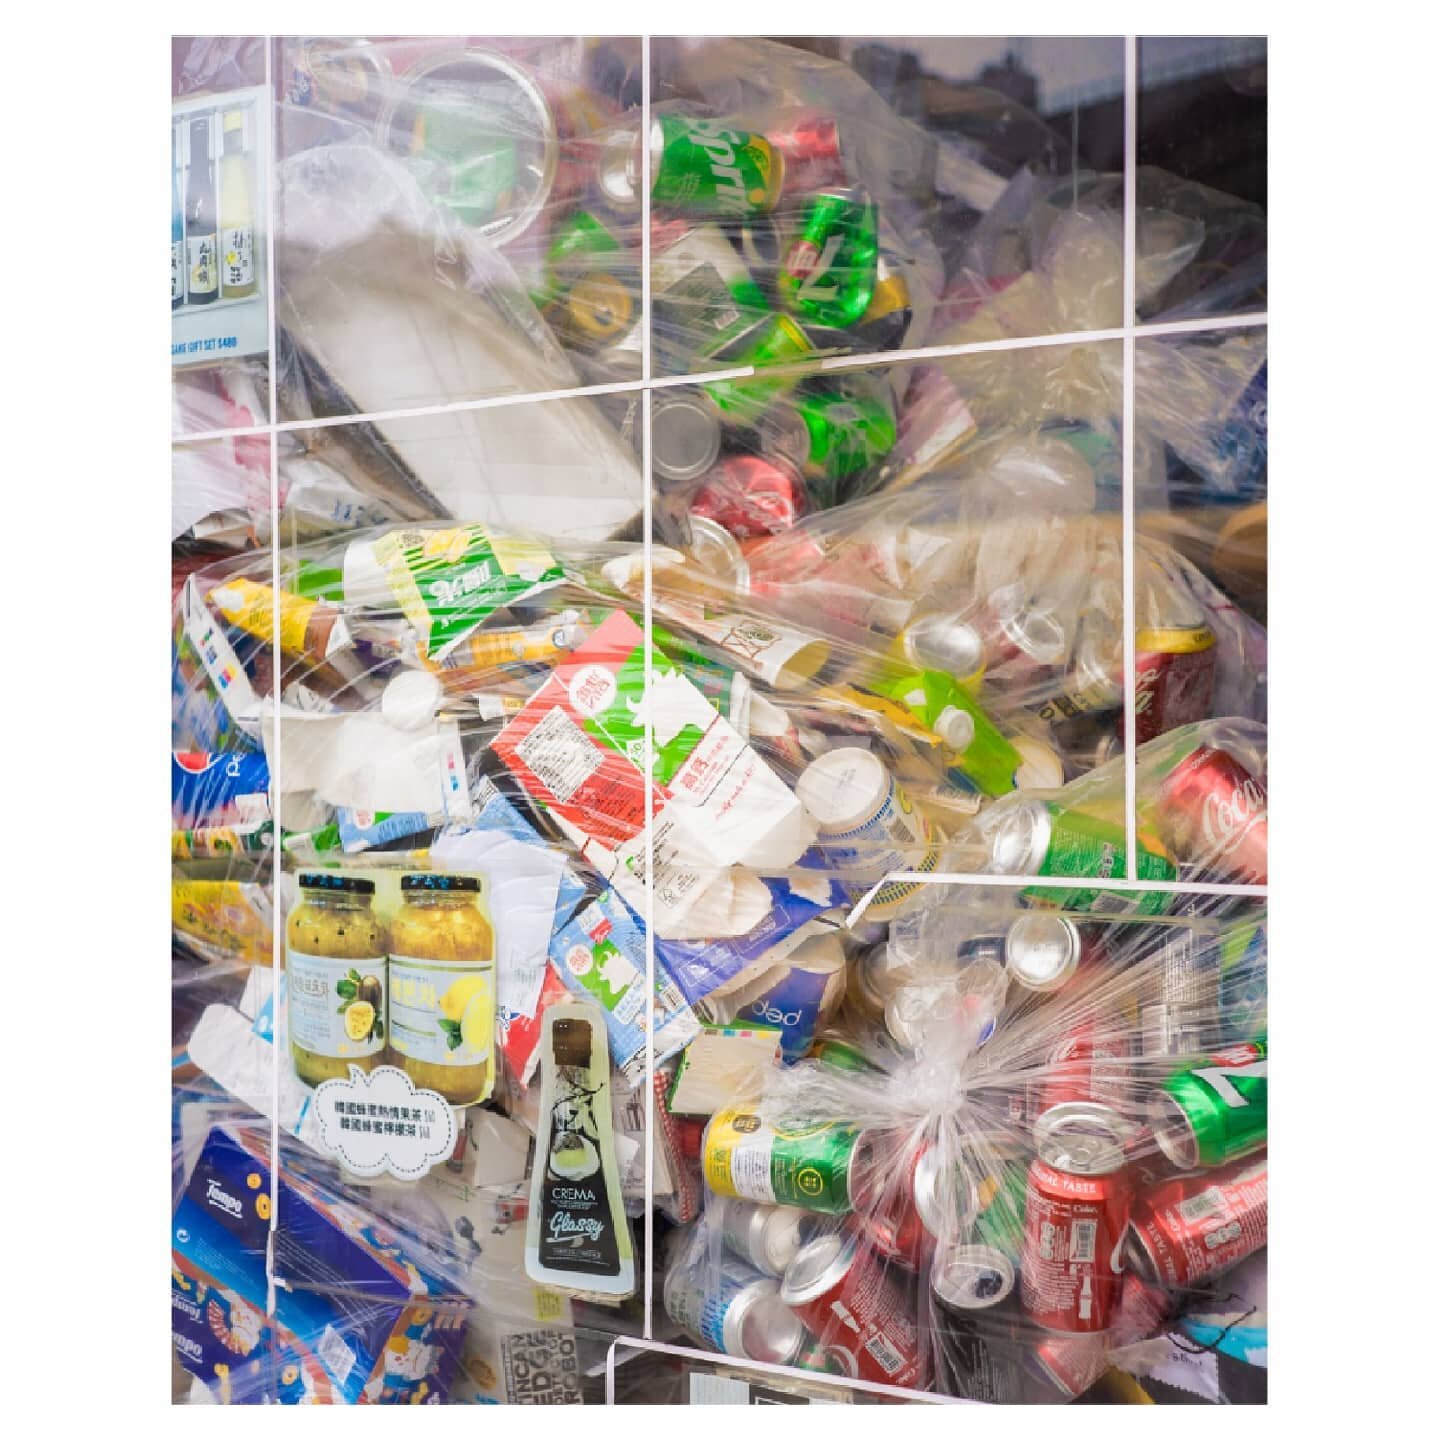 🧬🧬🧬🏗️🏗️🏗️ Digging through #older #images to find a #glass walled room with #bagged #recyclables
.
. 
.
#banal #straightphotography #grids #thisisthelasttimeilleverbepretty